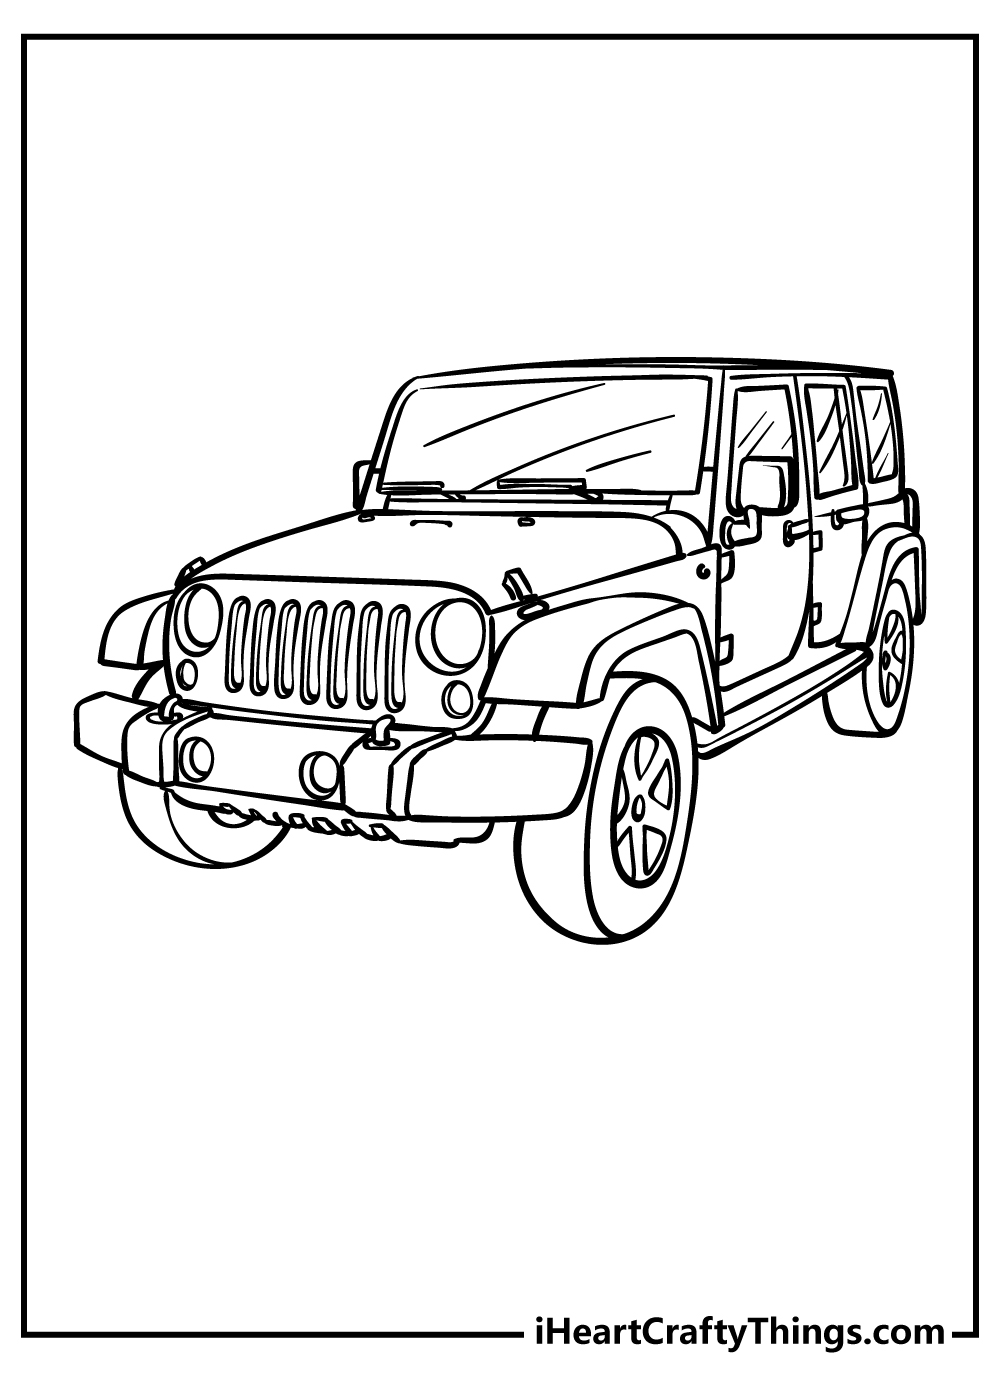 Jeep Coloring Pages for adults free printable